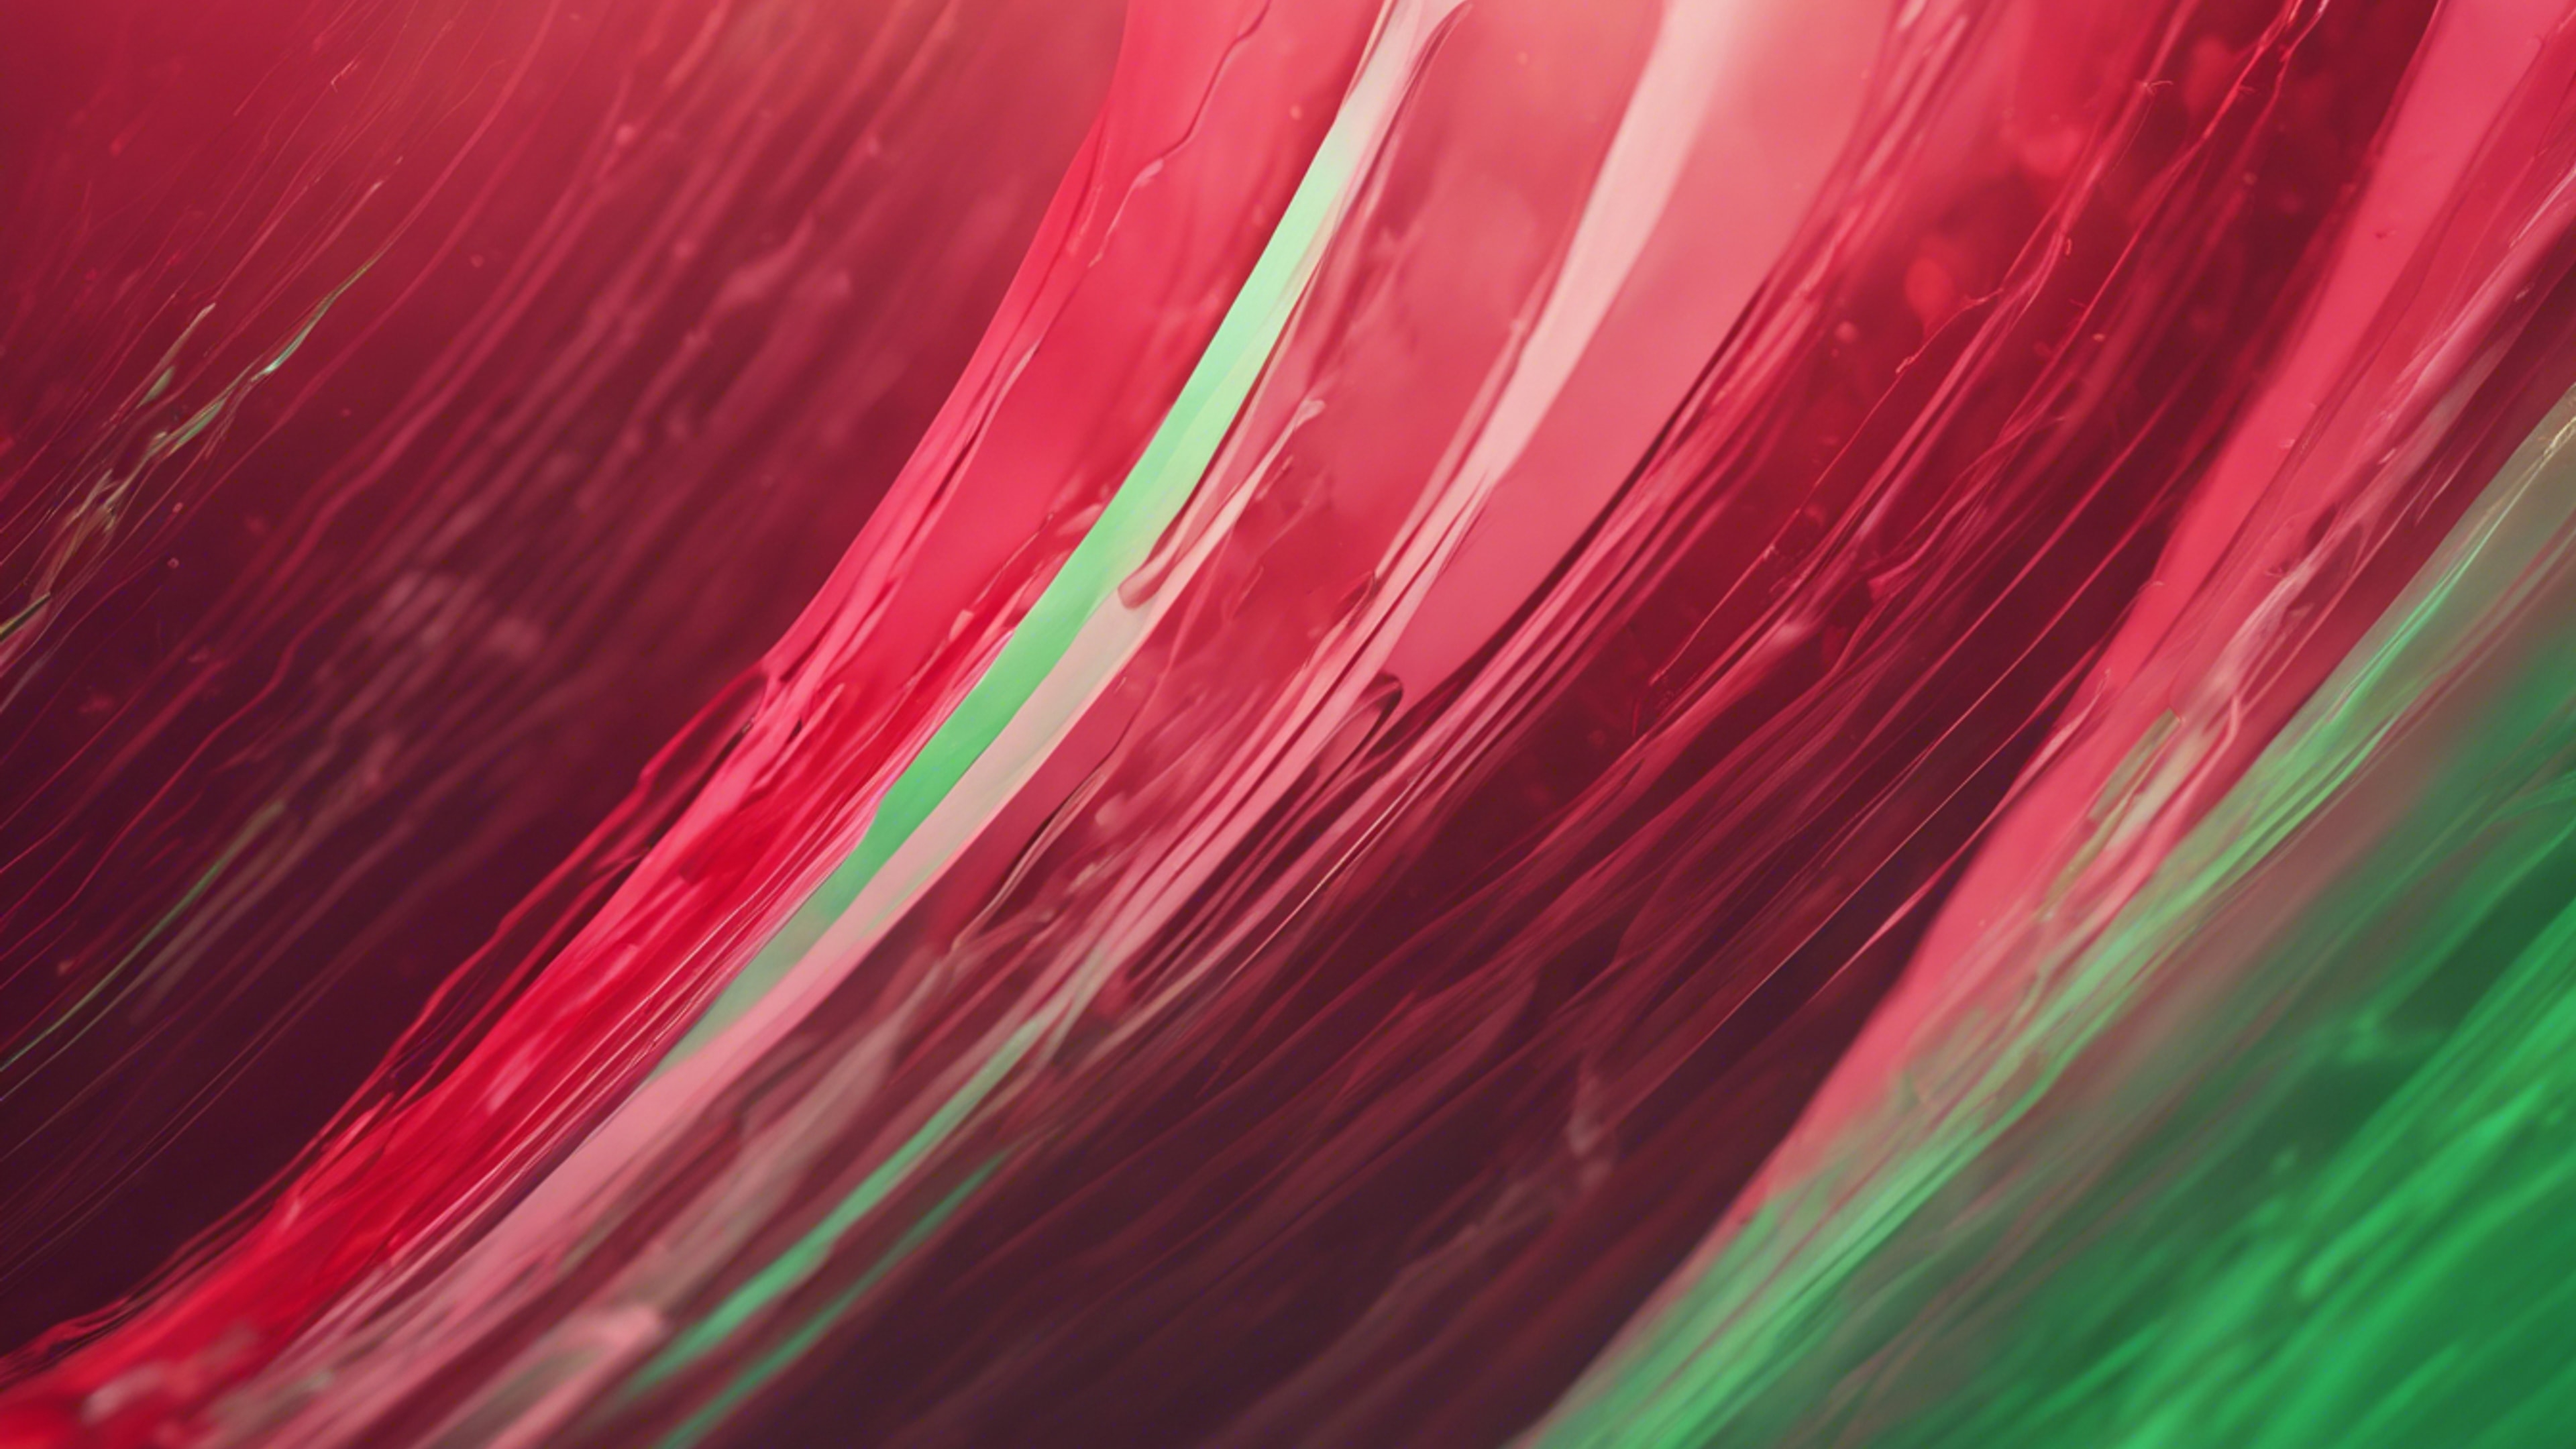 Smooth red and green gradients merging harmoniously in an abstract composition Wallpaper[1ddc14c50c534910ac9c]